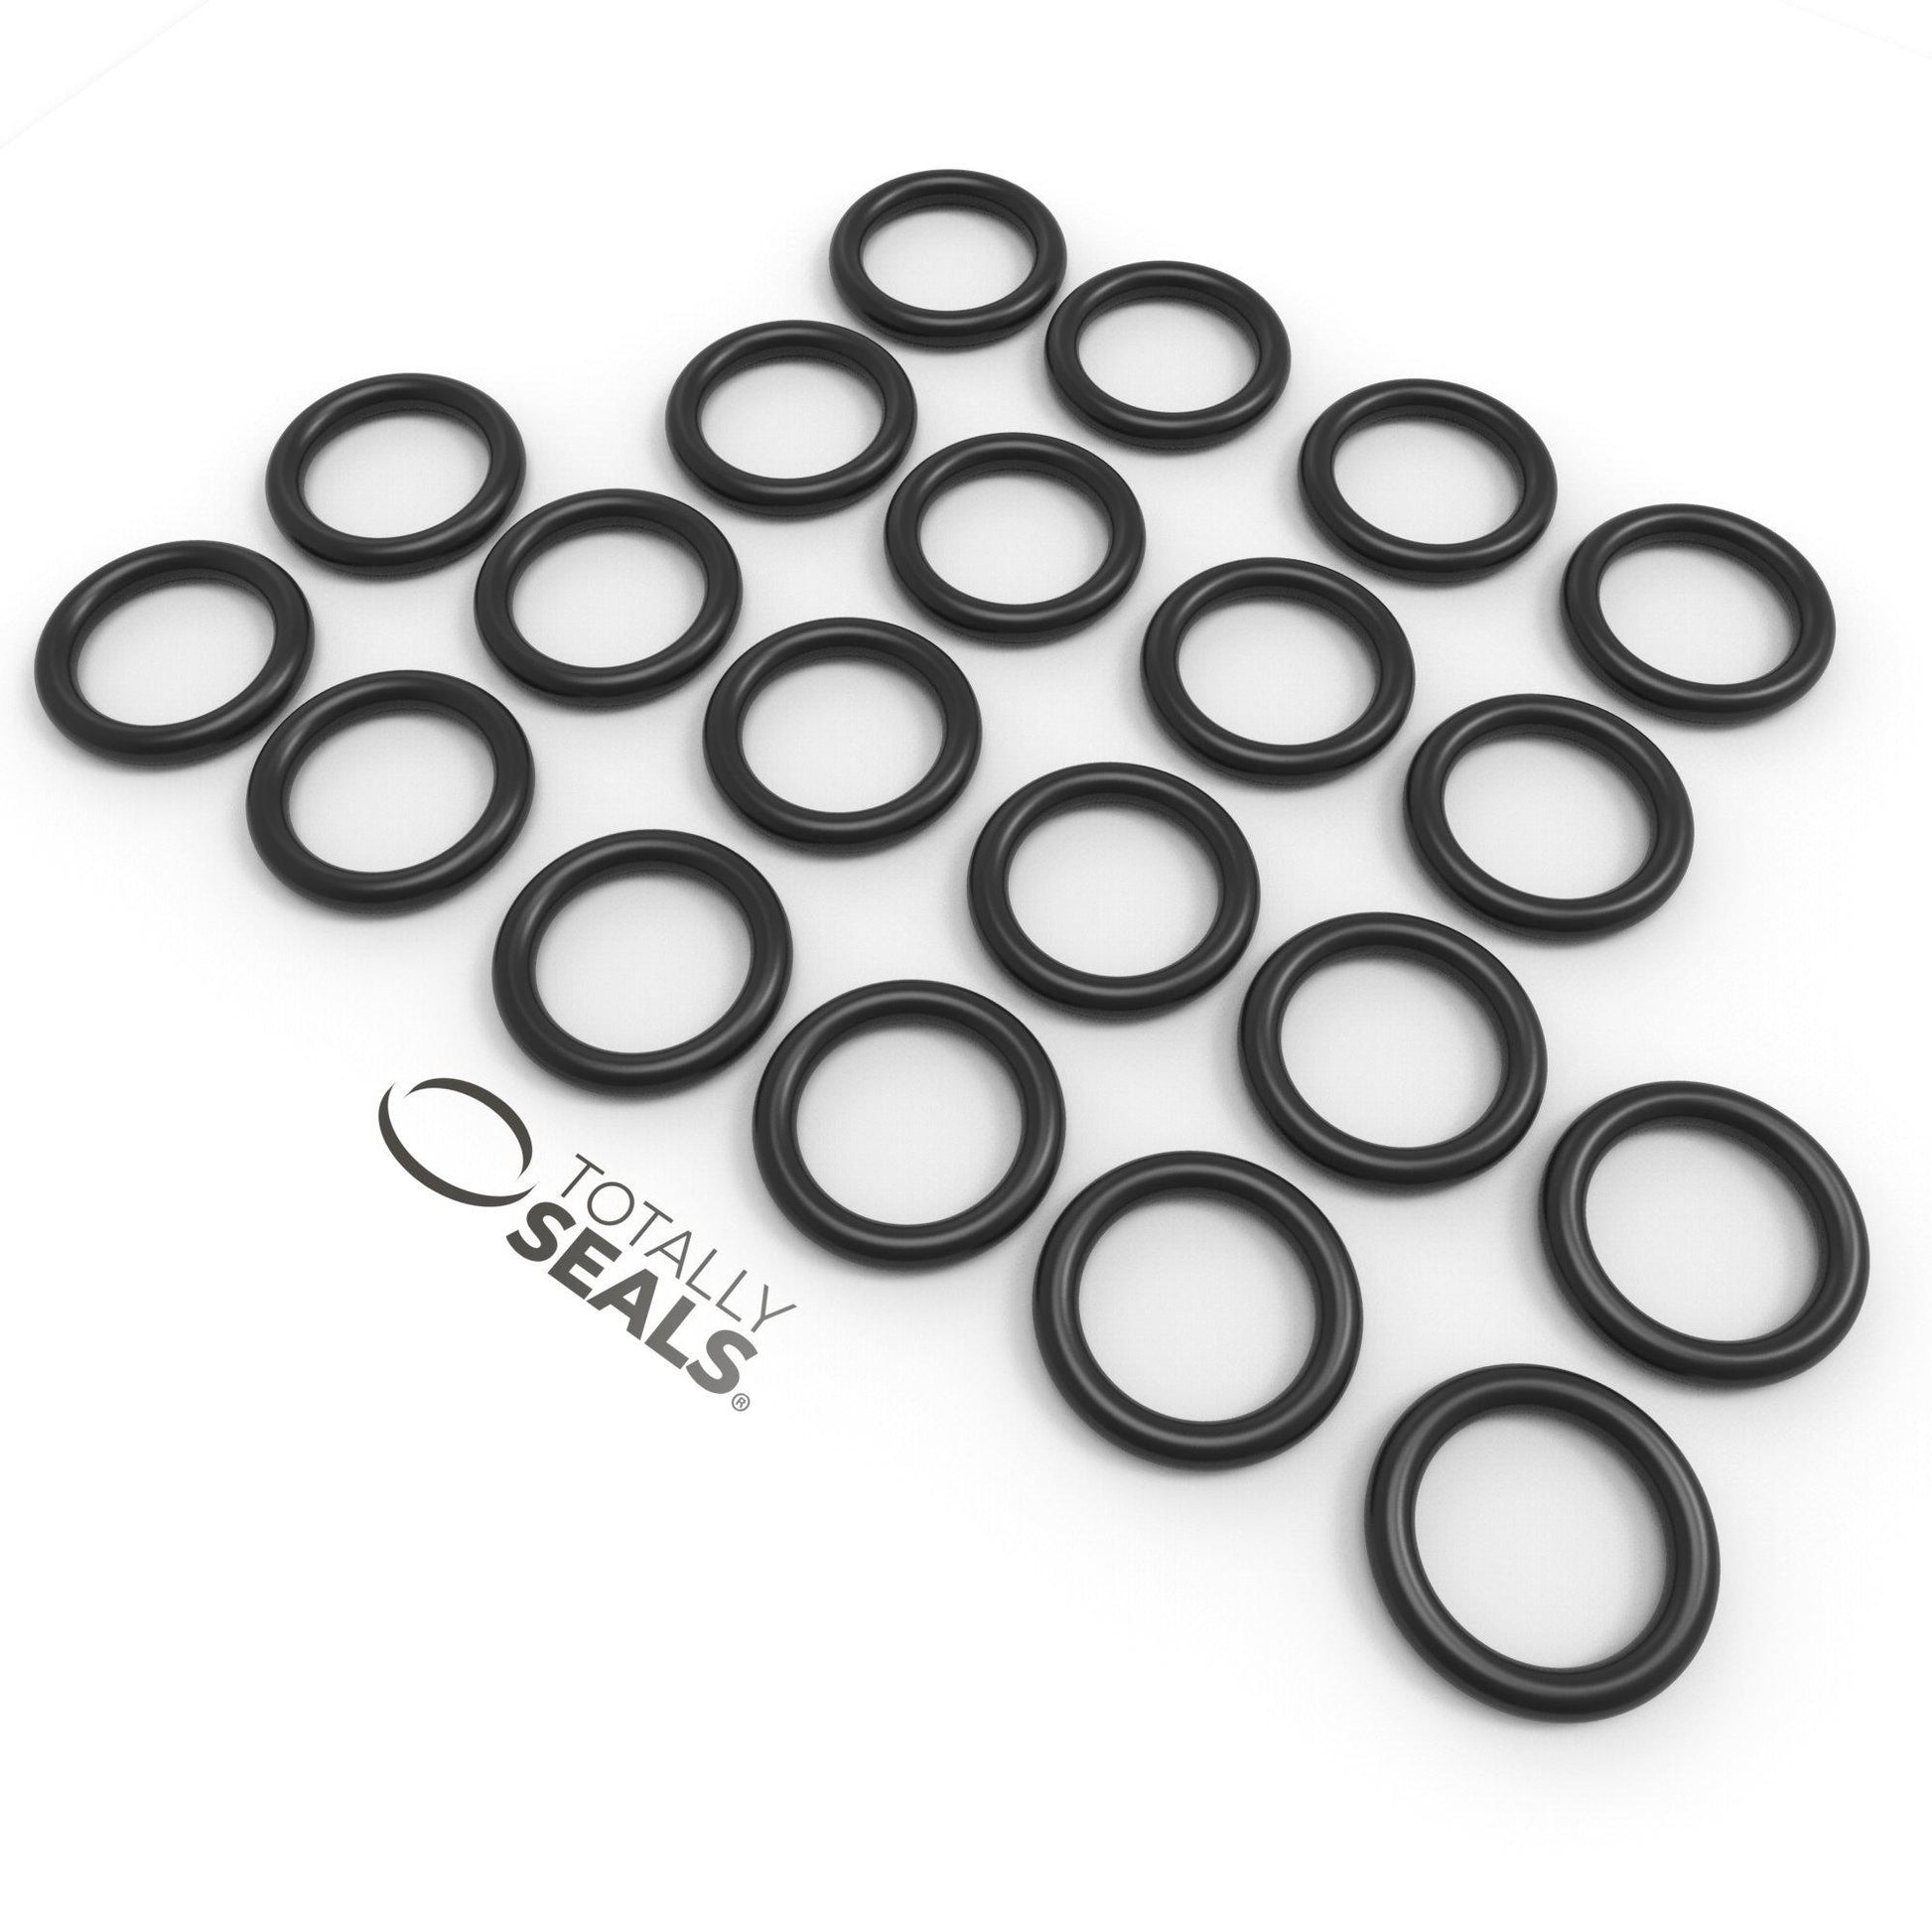 10mm x 1mm (12mm OD) Nitrile O-Rings - Totally Seals®